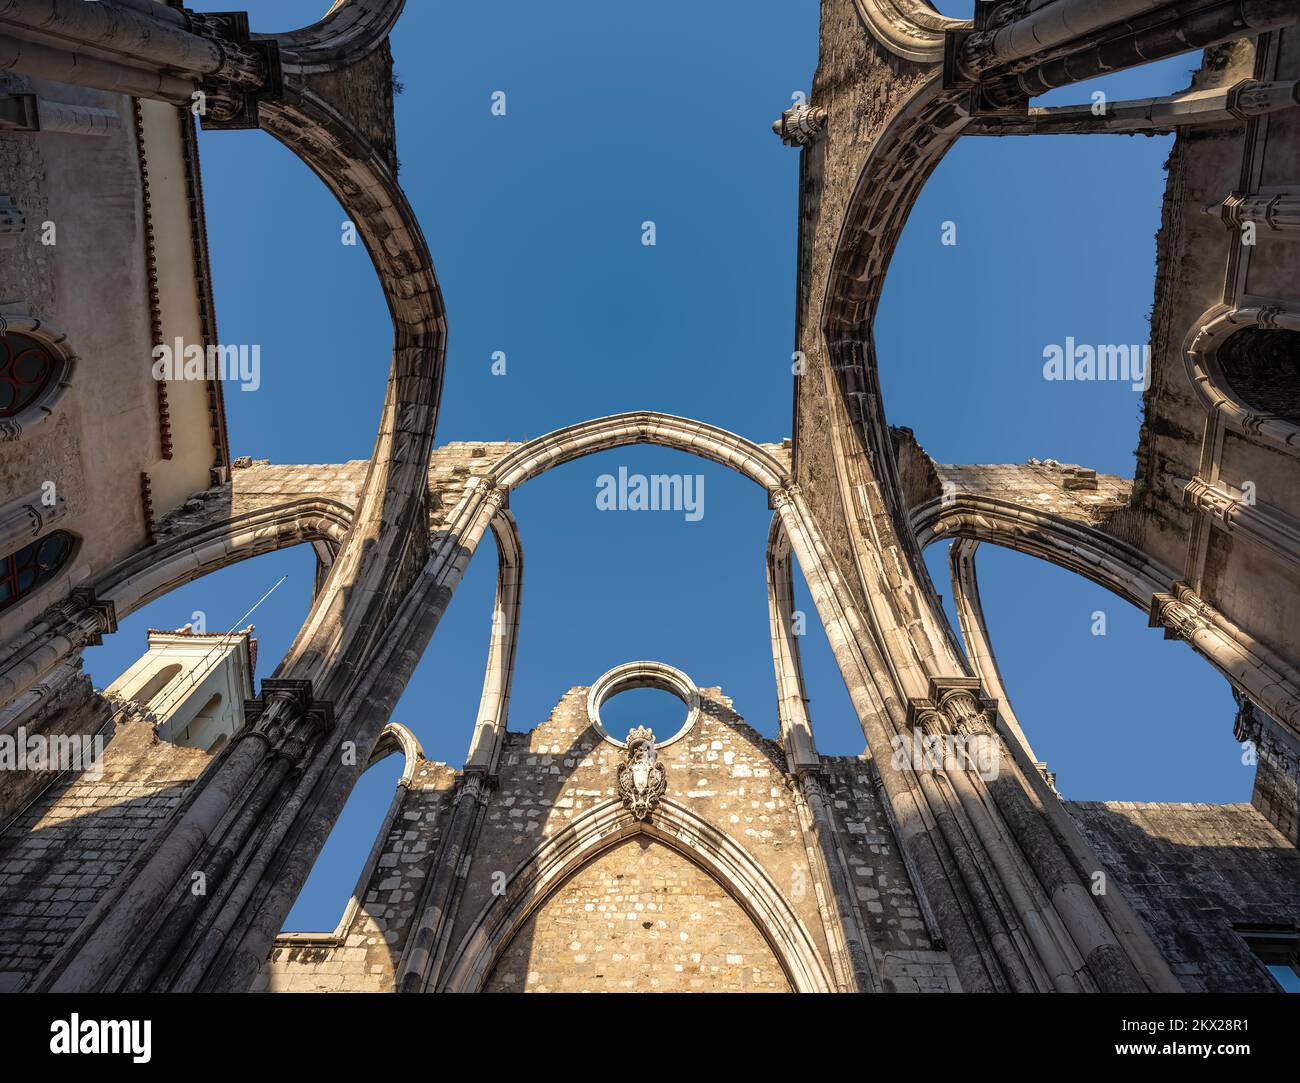 Ruined arches of the main nave of Carmo Church at Carmo Convent (Convento do Carmo) - Lisbon, Portugal Stock Photo